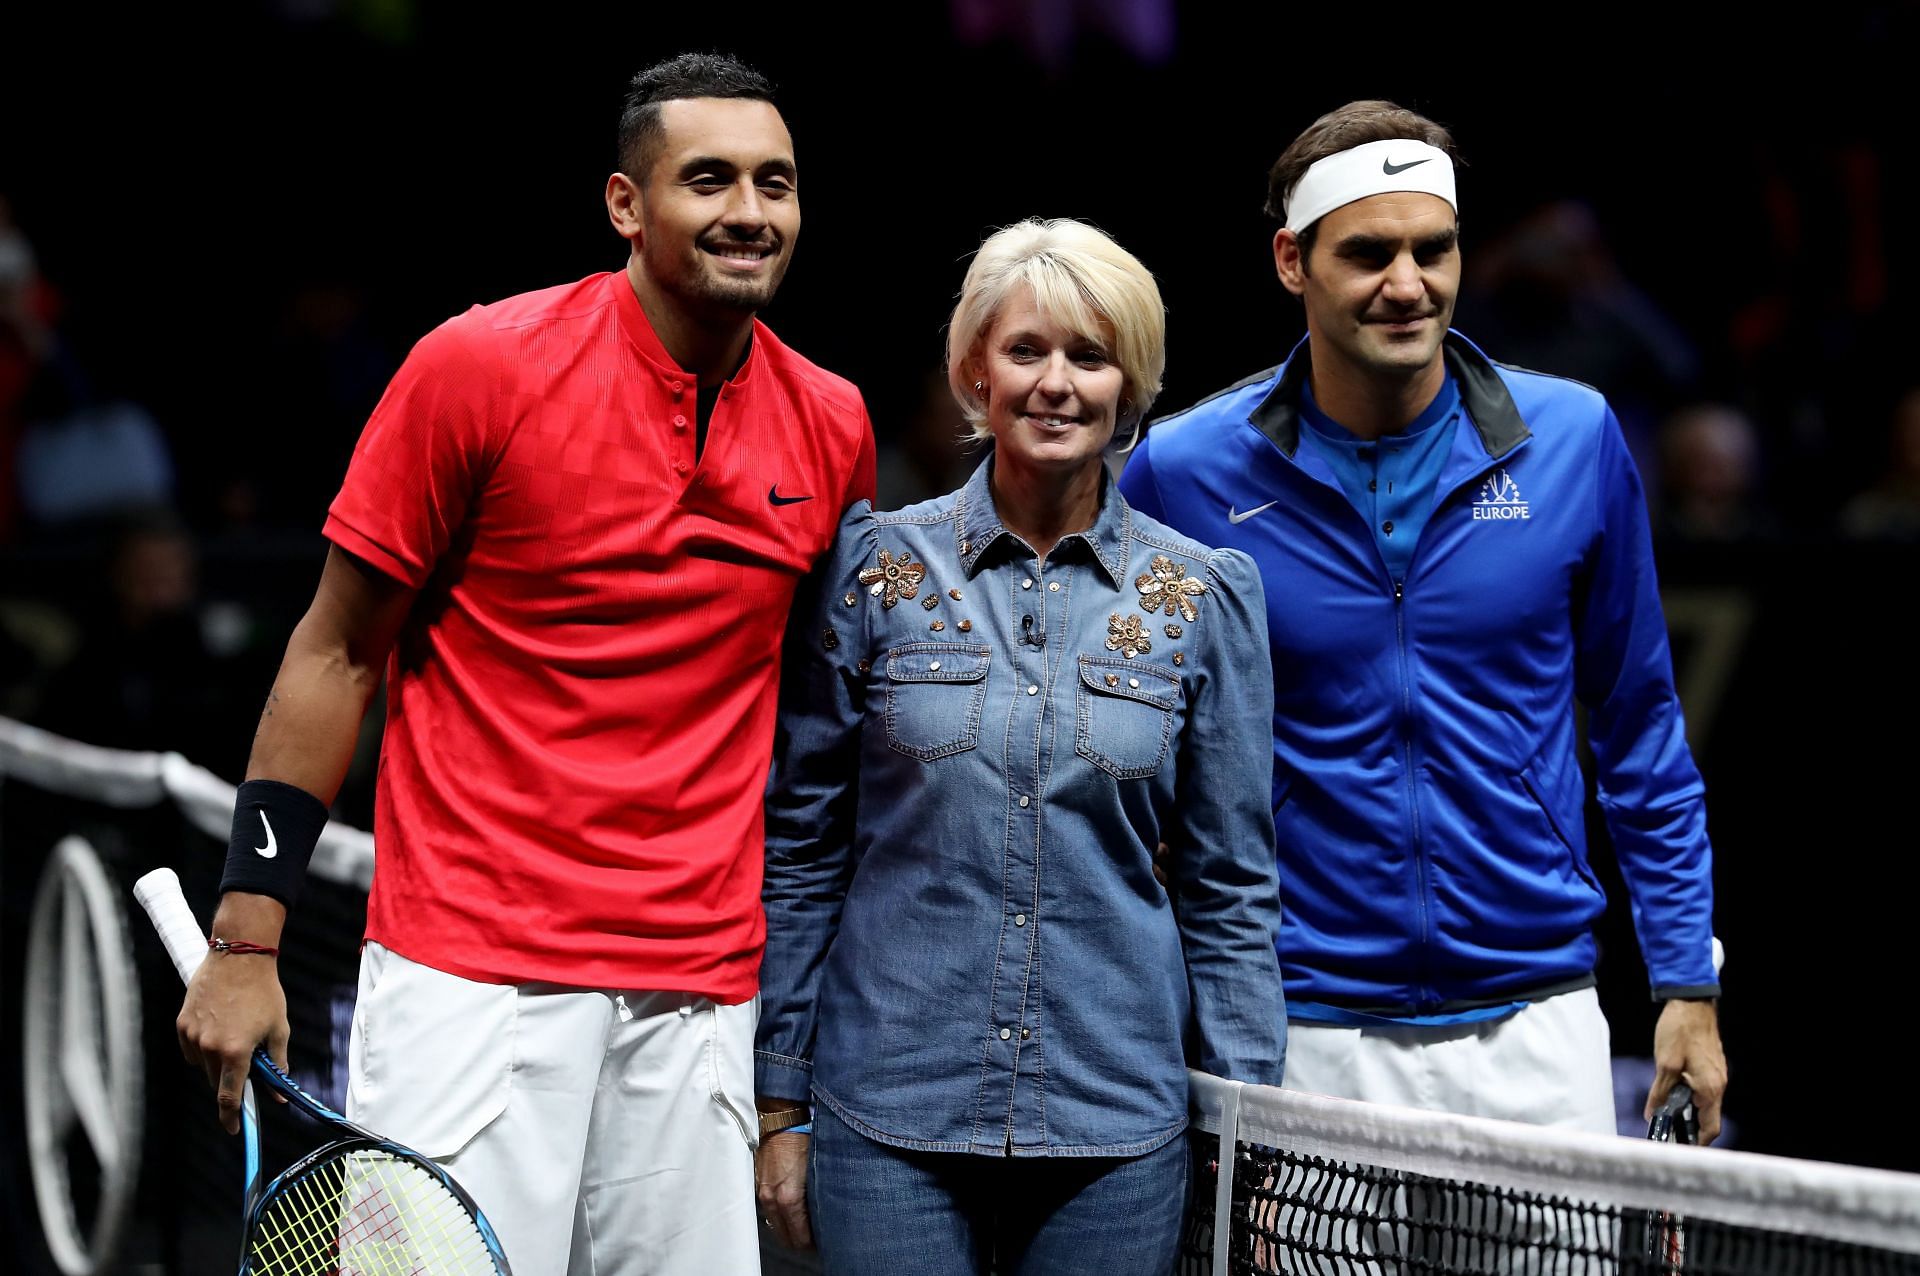 Nick Kyrgios and Roger Federer at the Laver Cup